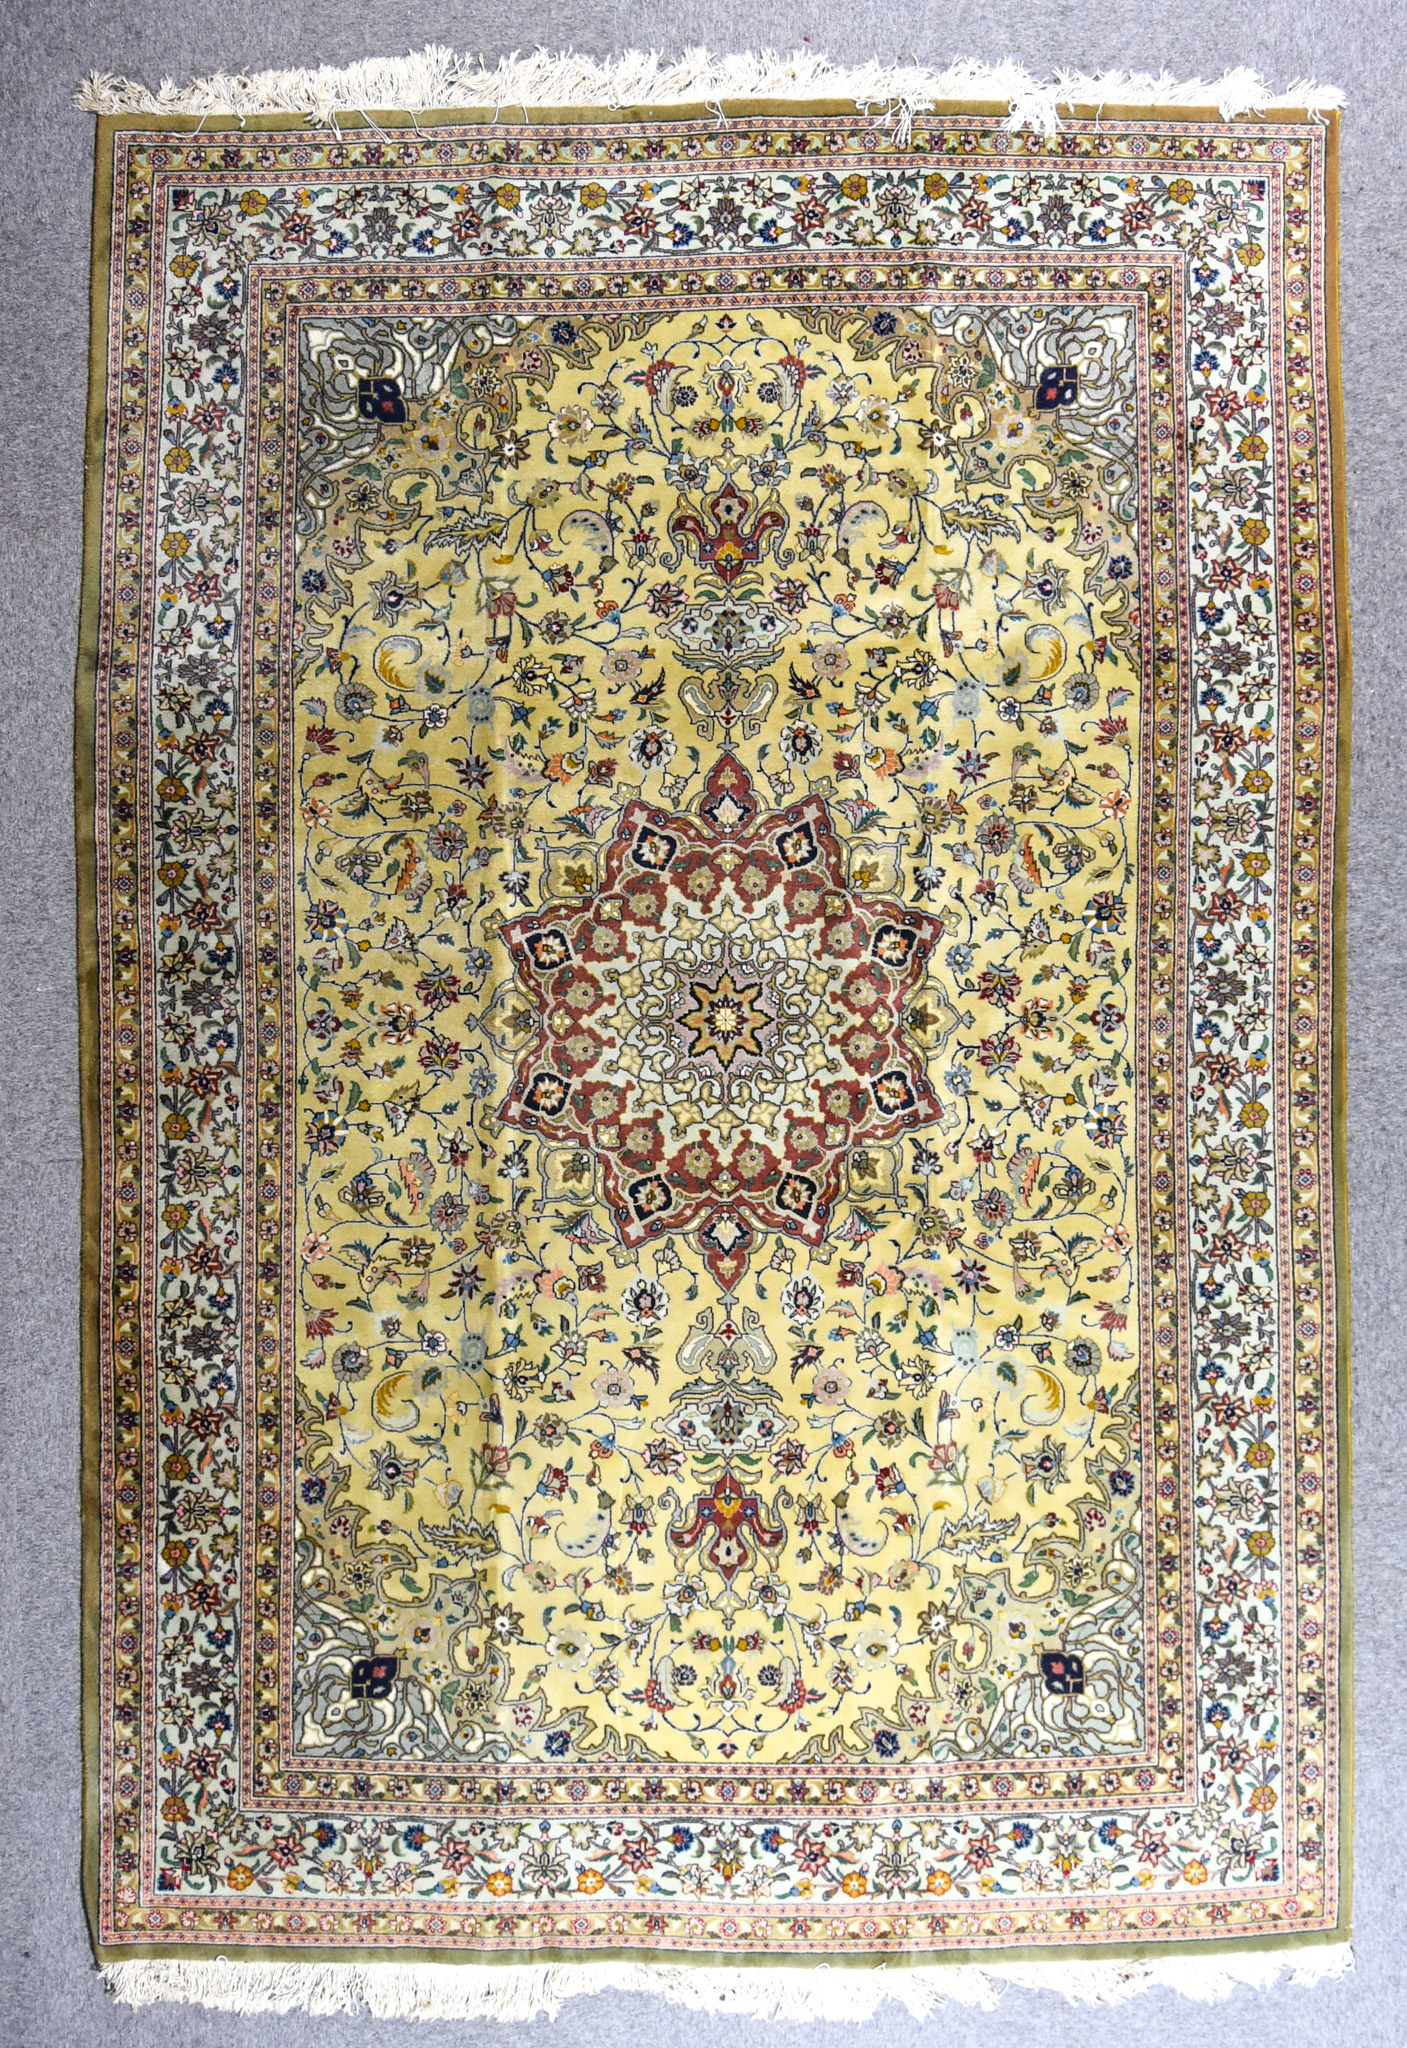 A 20th Century Tabriz Carpet, woven in colours of lime, mint and wine, with a bold central floral